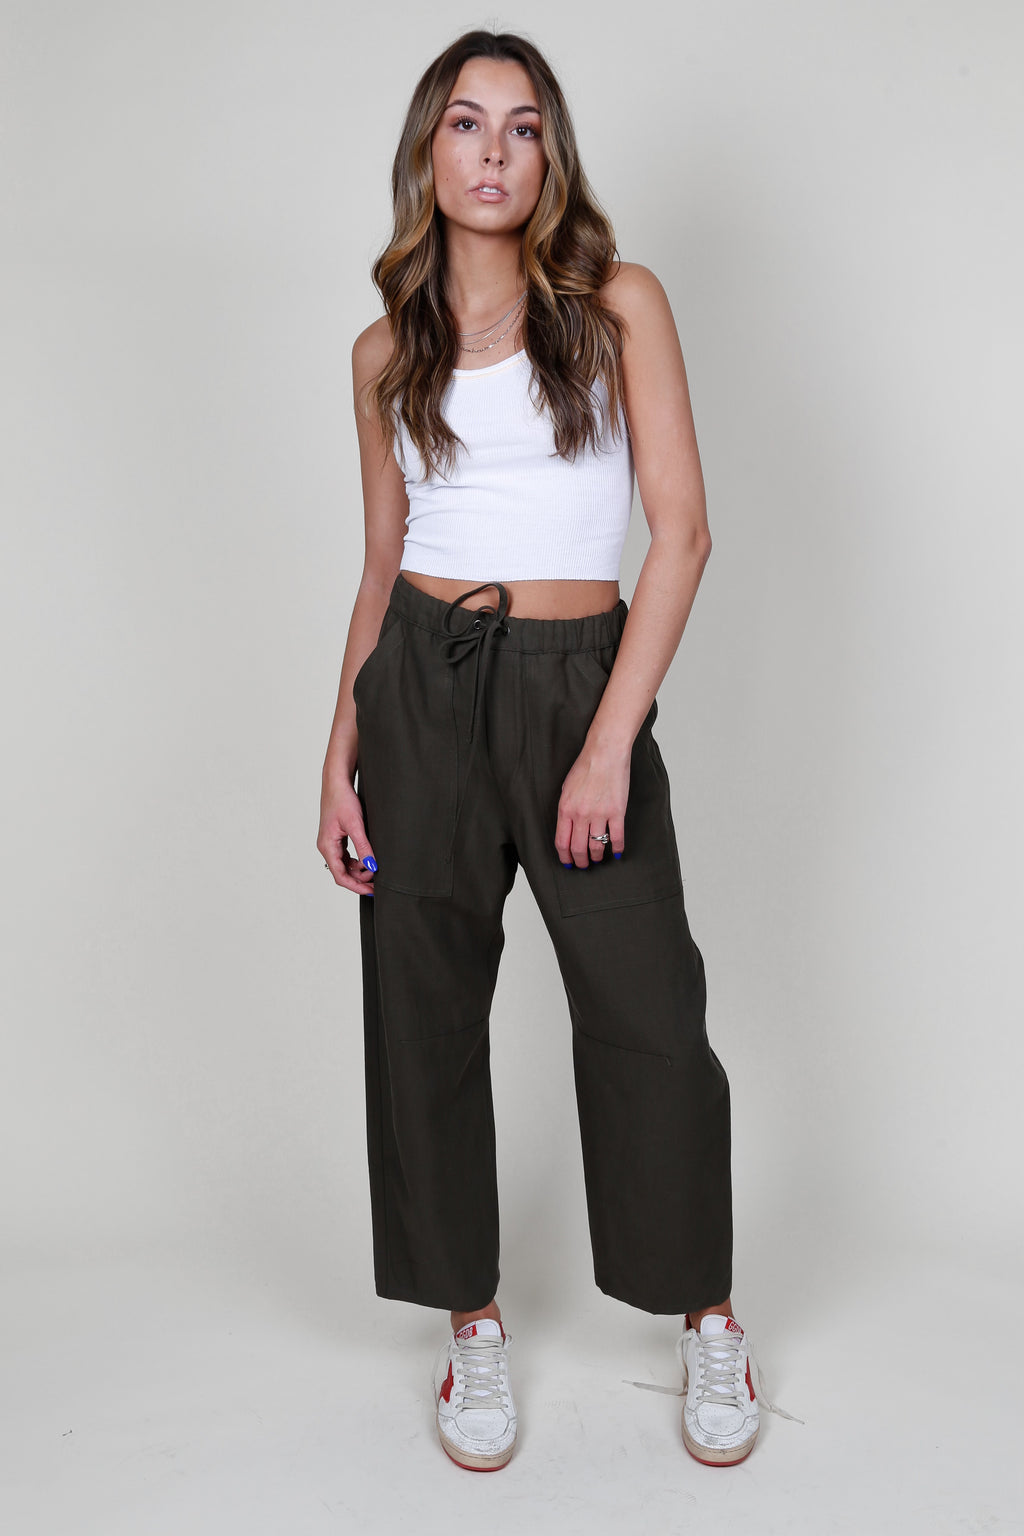 ENZA COSTA | Twill Utility Pant - Military